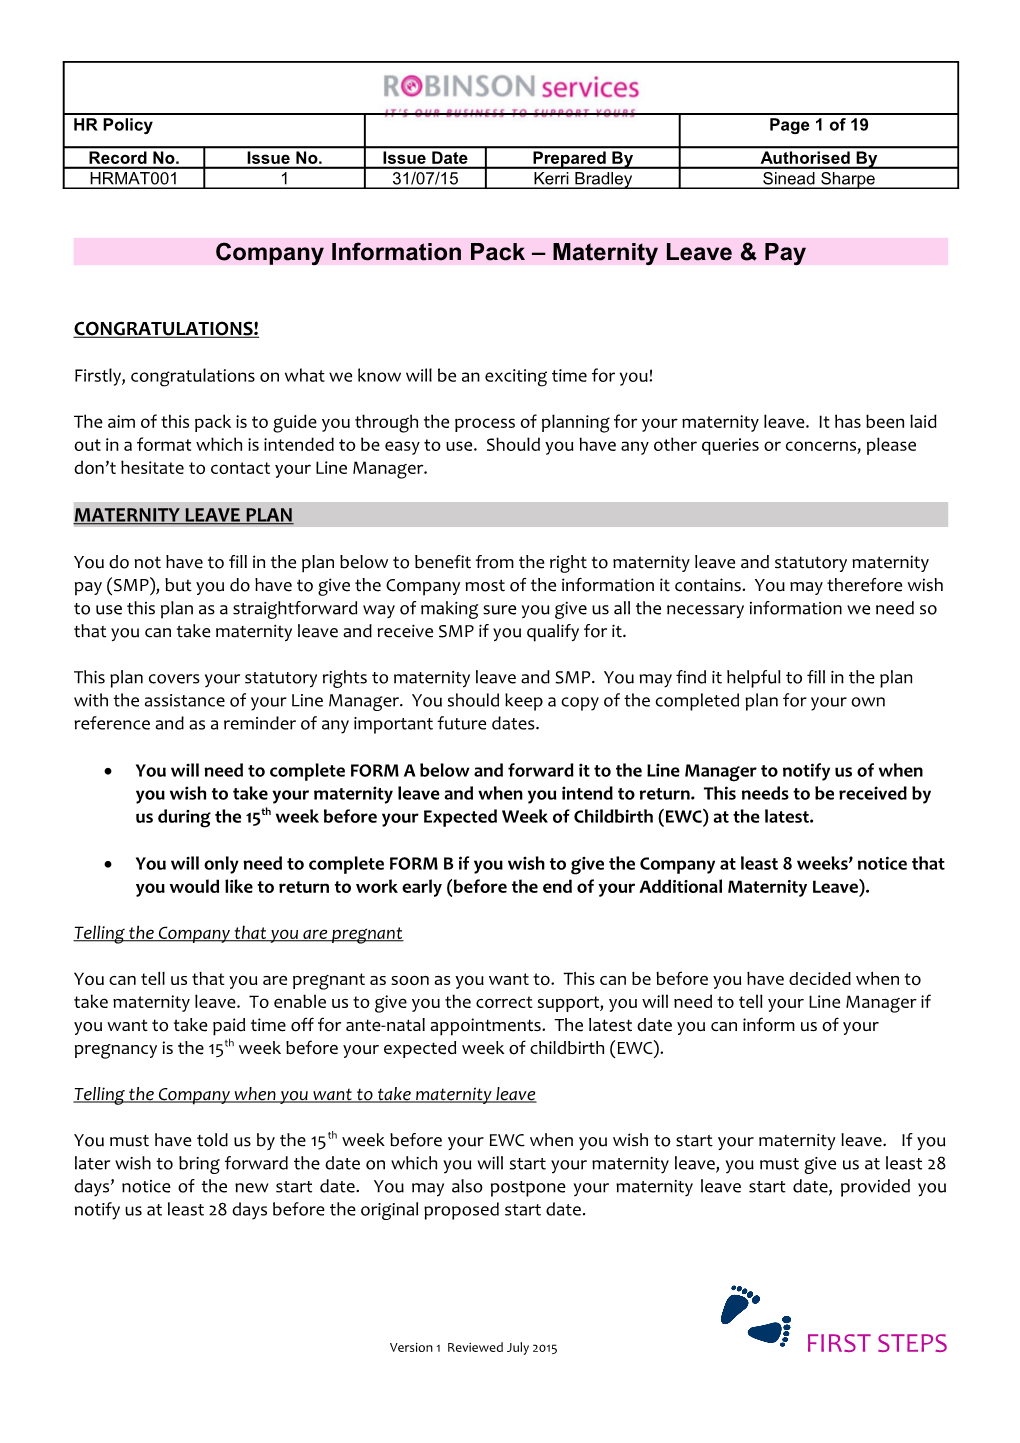 Company Information Pack Maternity Leave & Pay